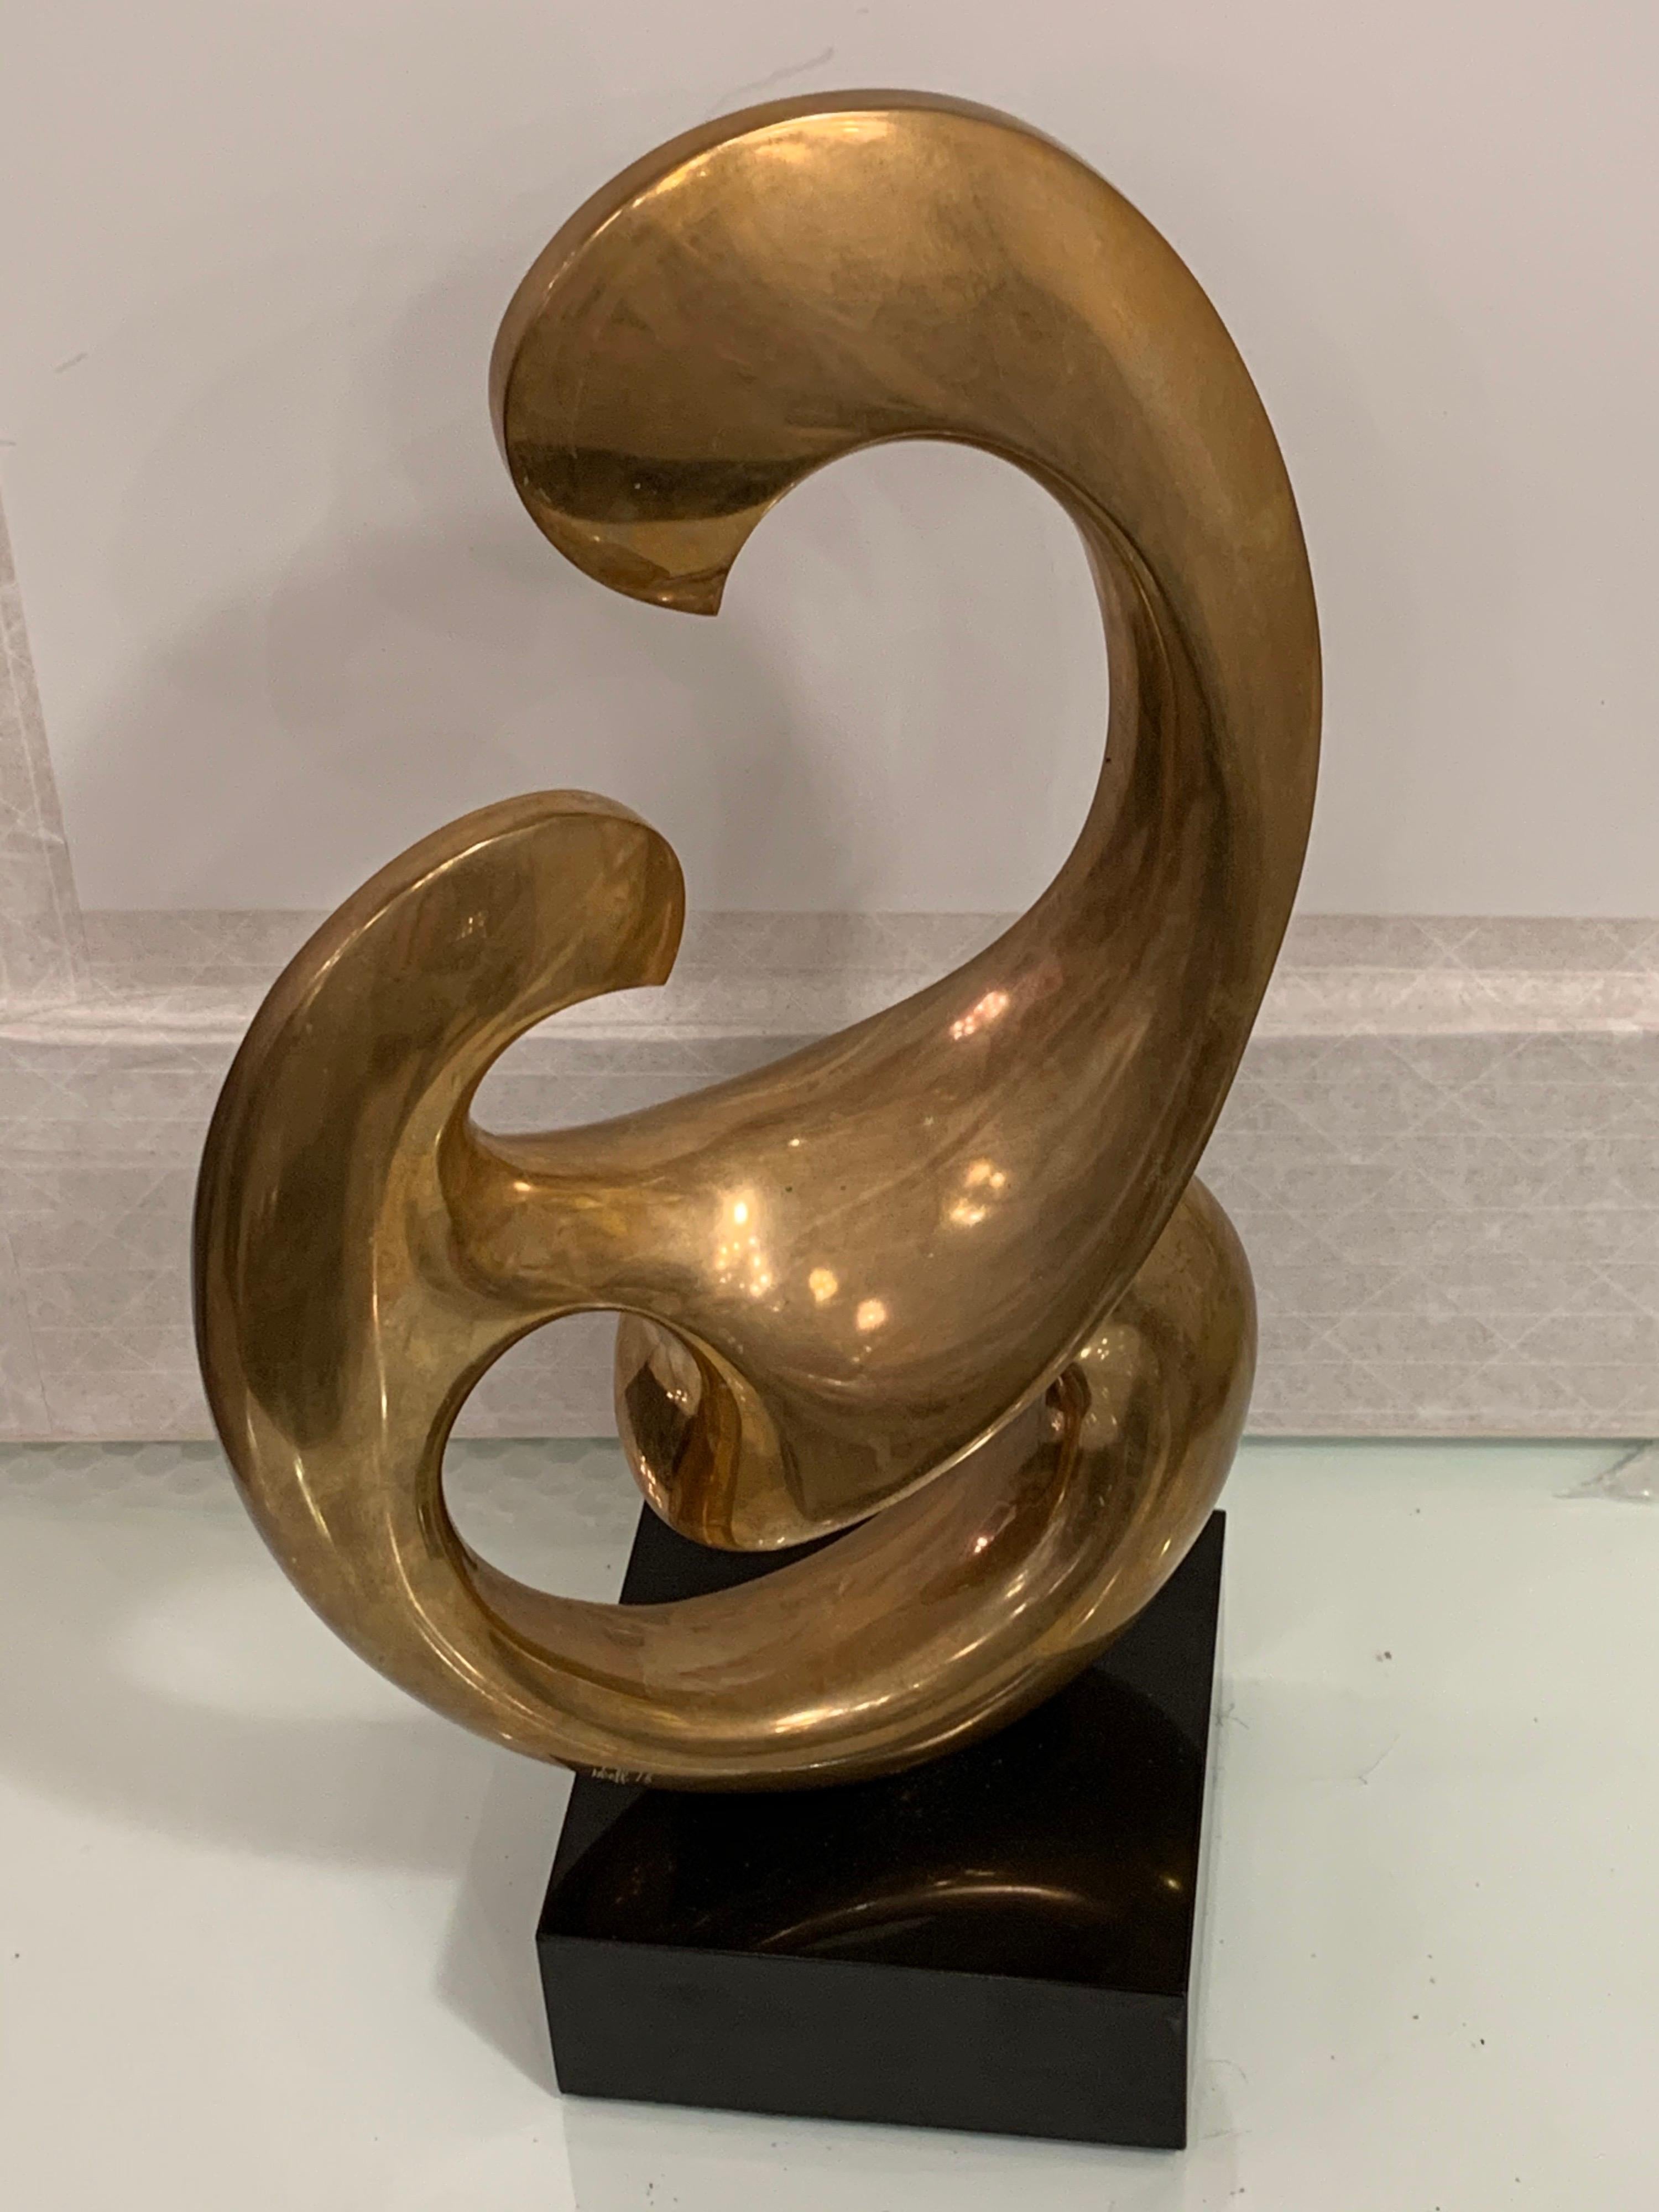 Late 20th Century Bronze Sculpture by Antonio Grediaga Kieff, Signed and Numbered